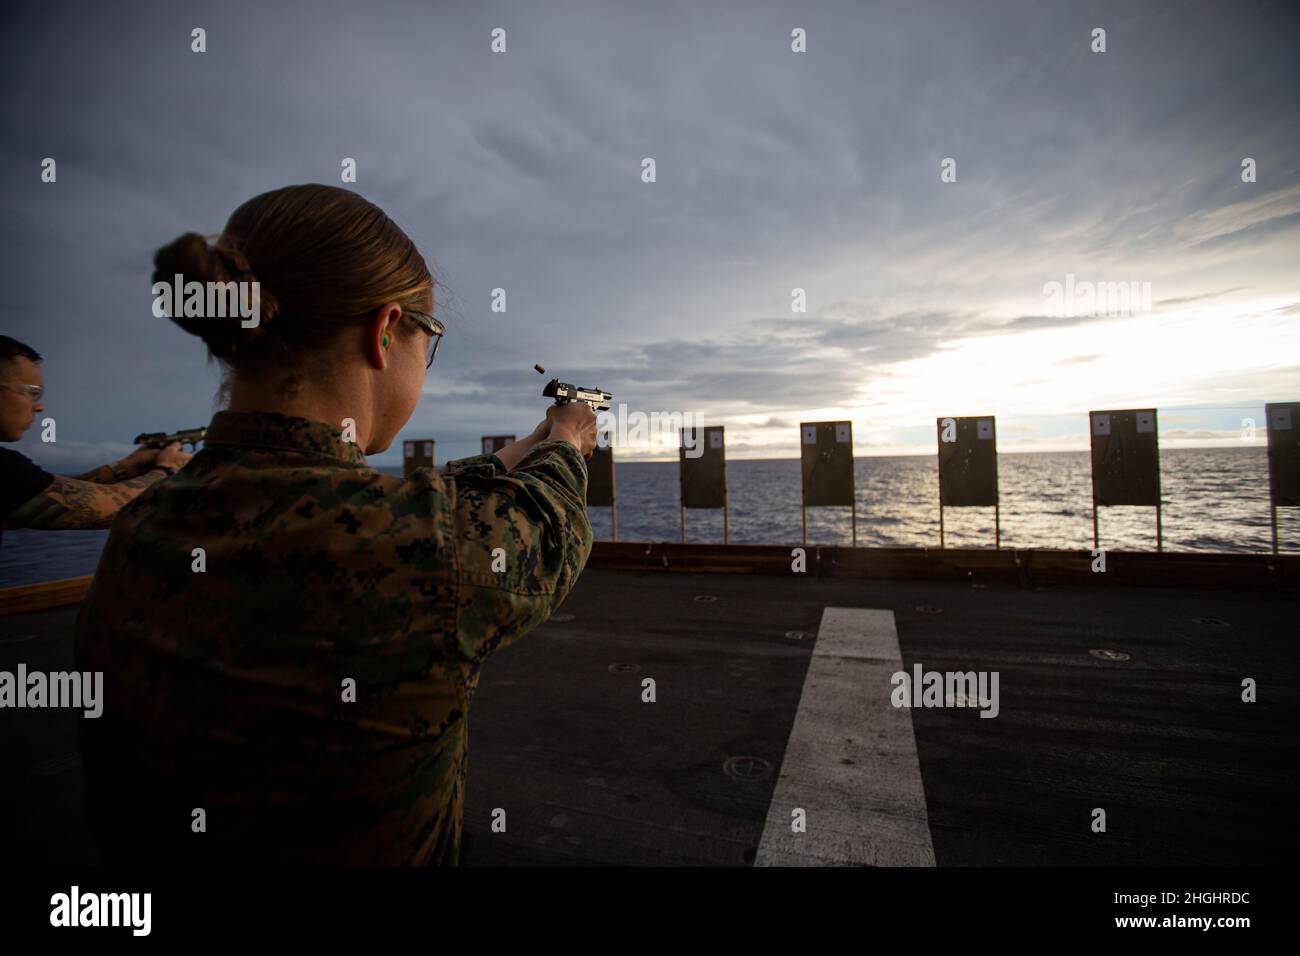 U.S. Marine Corps 1st Lt. Elizabeth Schilder, a weapons and tactics instructor, with 31st Marine Expeditionary Unit (MEU), waits for further instruction during a shooting competition aboard amphibious assault ship USS America (LHA 6) in the Solomon Sea, Aug. 7, 2021. The event consisted of Marines and Sailors competing as they shoot a series of drills with a goal of having the highest total score. The 31st MEU is operating aboard ships of the America Expeditionary Strike Group in the 7th fleet area of operation to enhance interoperability with allies and partners and serve as a ready response Stock Photo